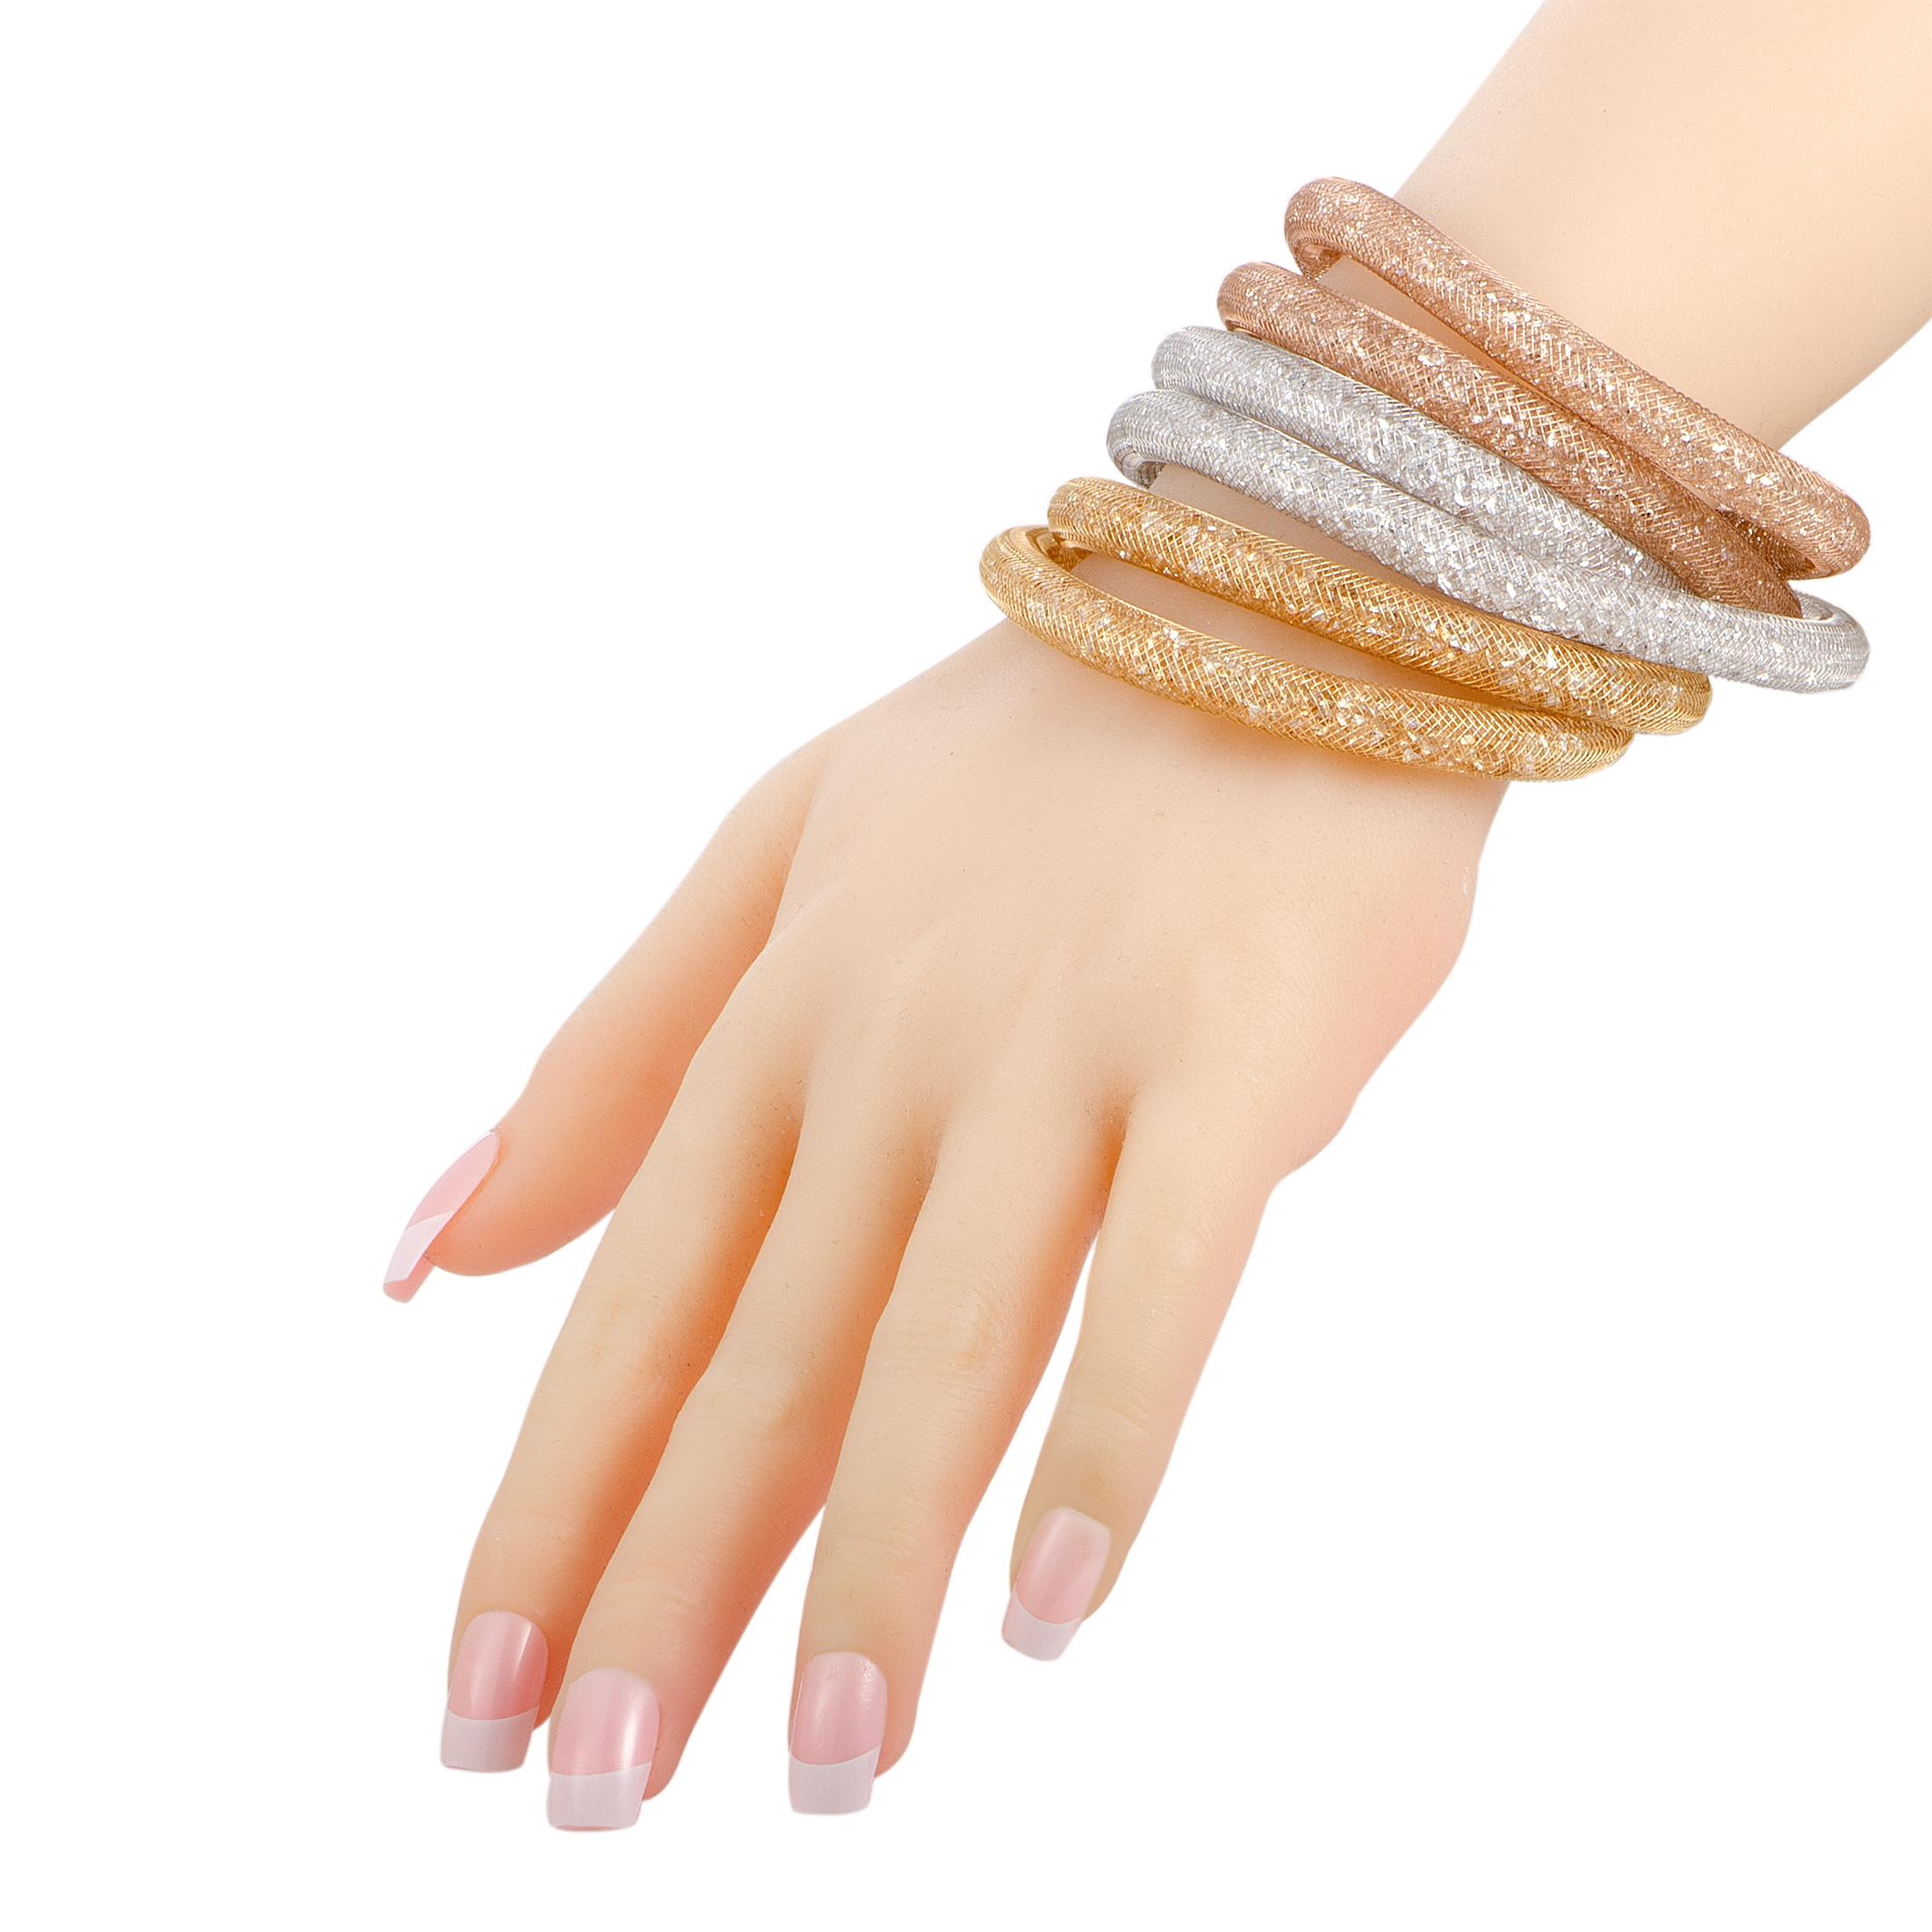 The Swarovski “Stardust Deluxe” bracelet set includes three bracelets that are presented in rose, white, and yellow gold tone. The bracelets measure 16.00” in length and boast fishnet tubes filled with crystals. Each bracelet weighs 34.5 grams, for